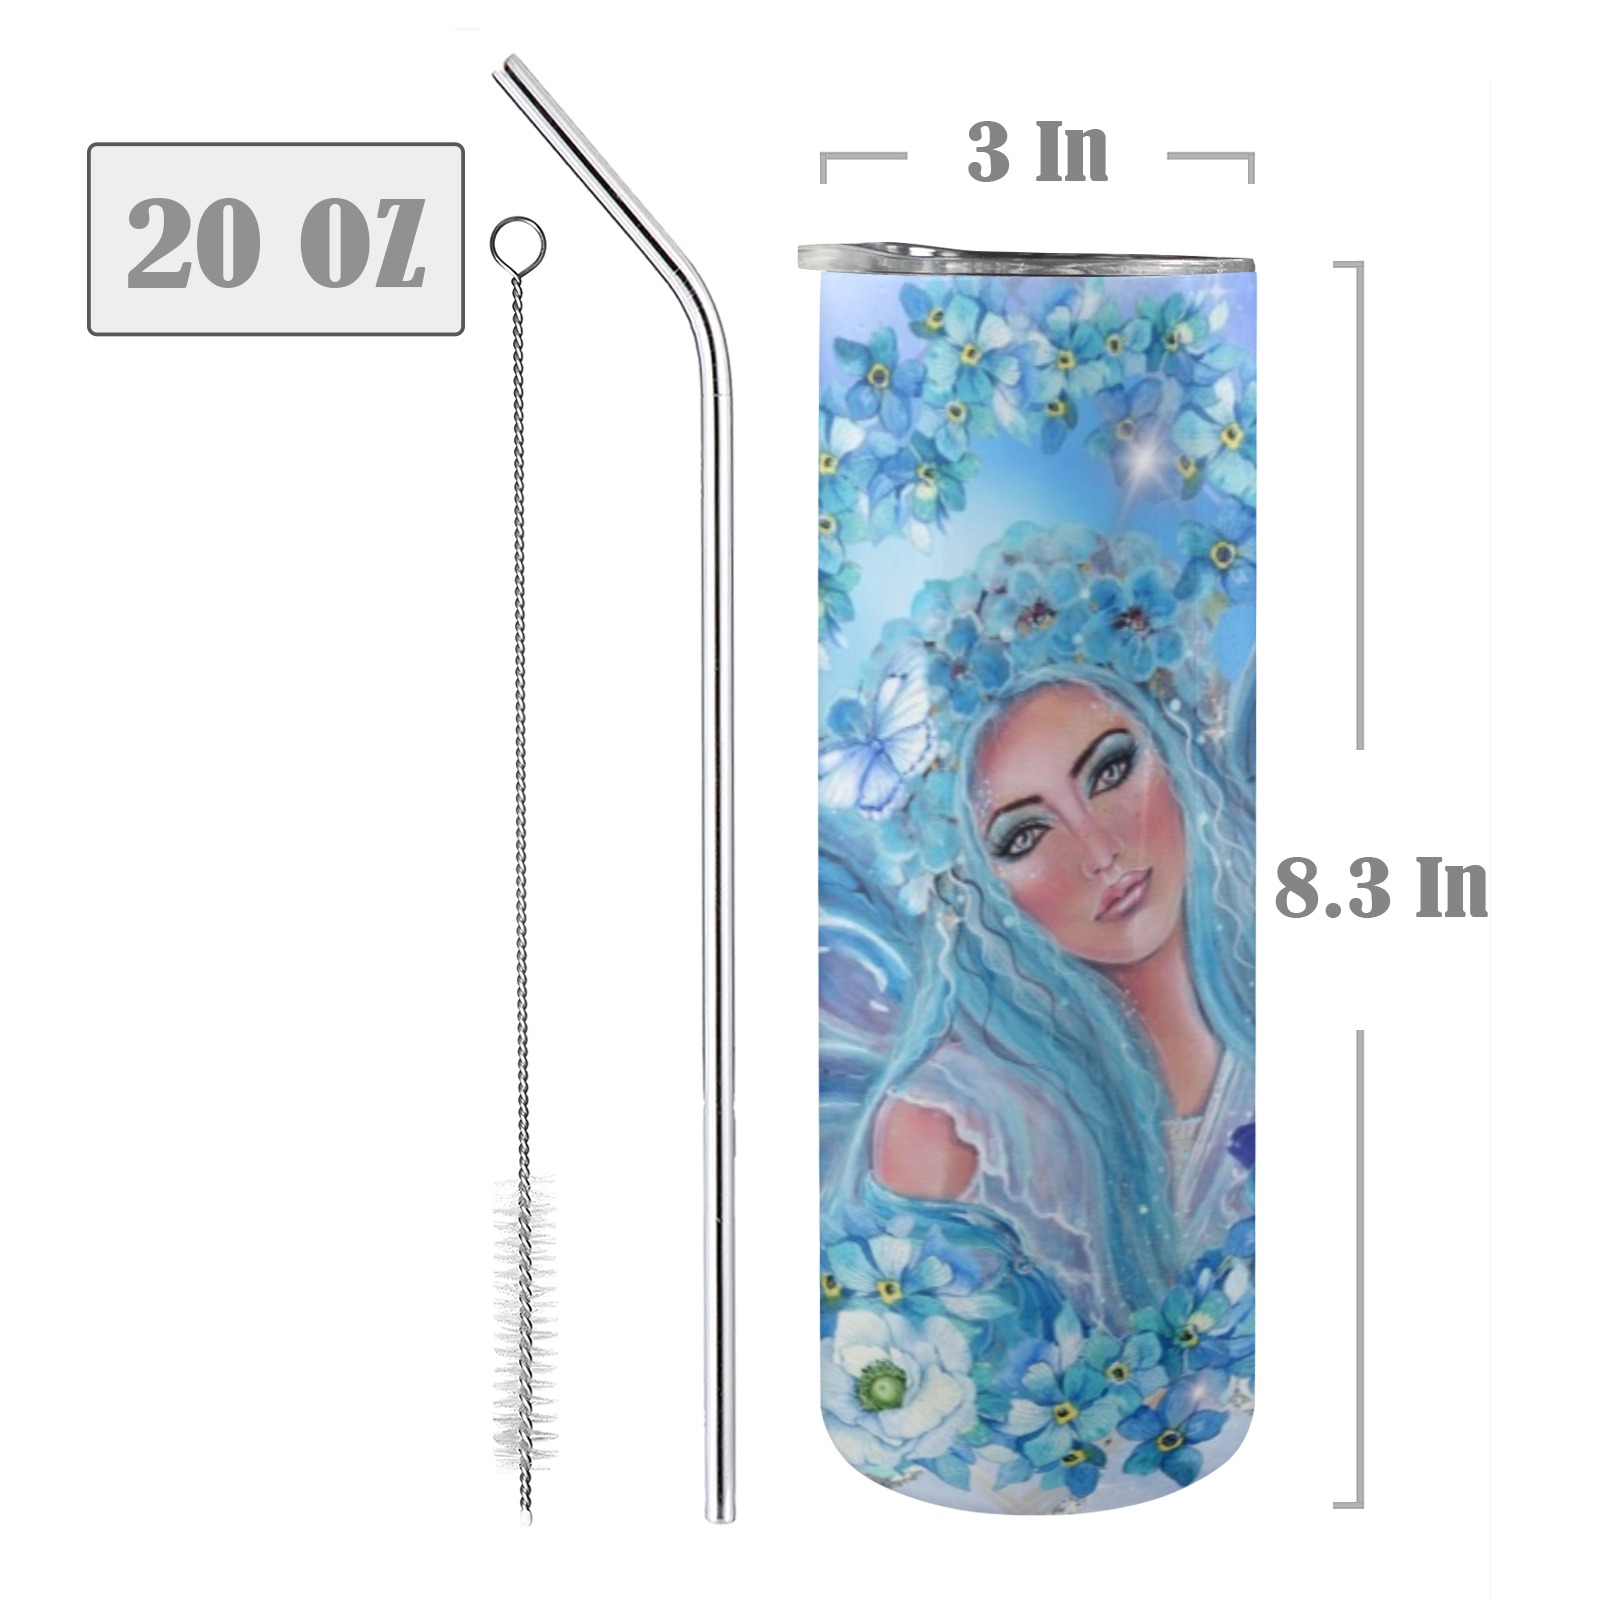 Krysta fairy 20oz Tall Skinny Tumbler with Lid and Straw